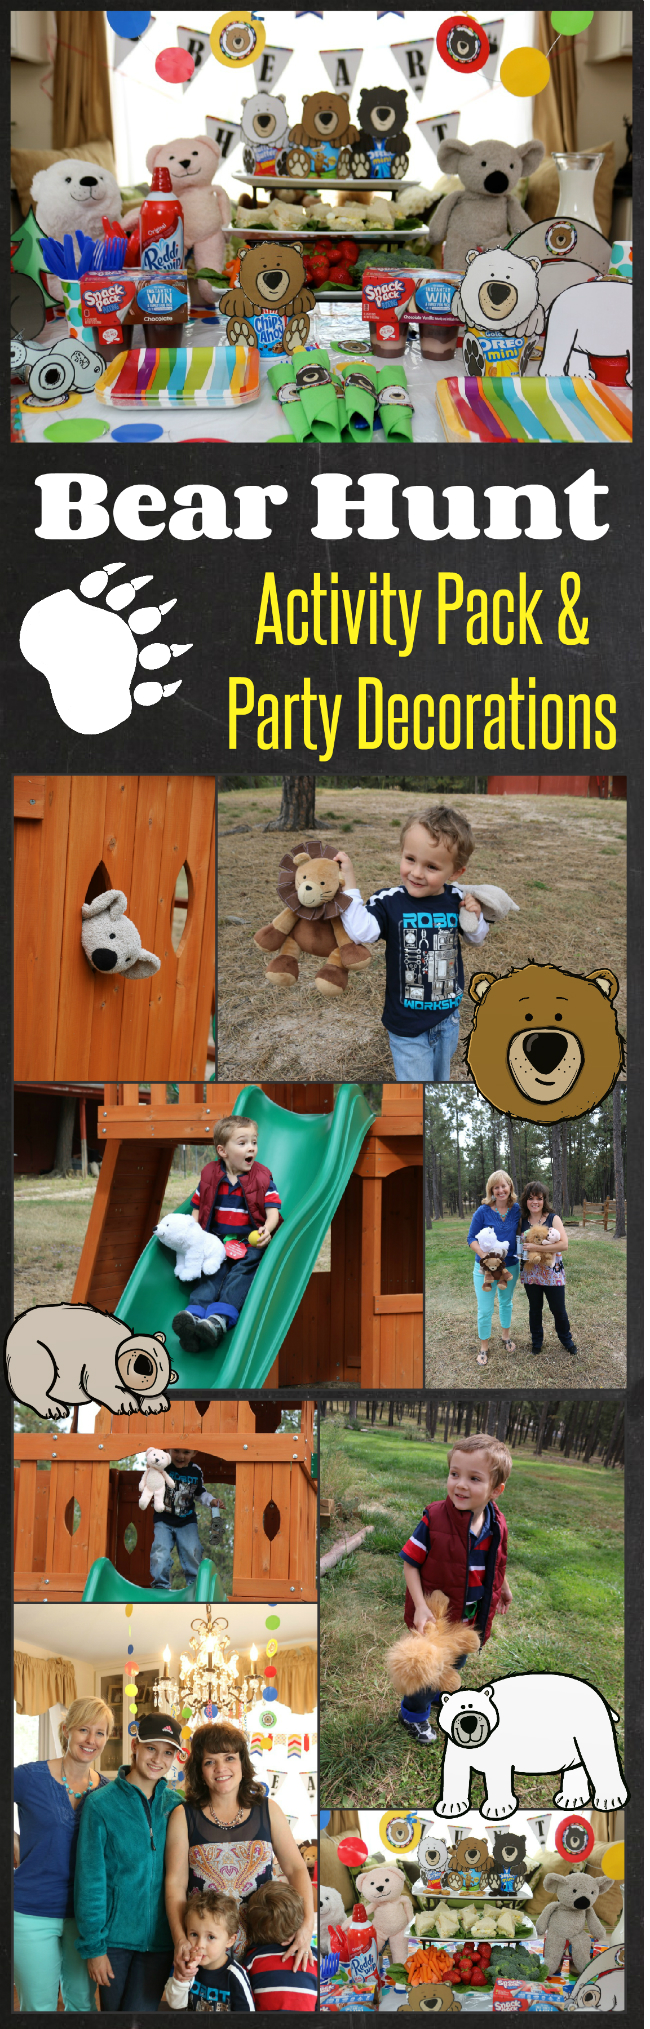 Easy play date idea and Fun Kids Activity - a Bear Hunt activity pack and party decorations by HappyandBlessedHome.com.jpg